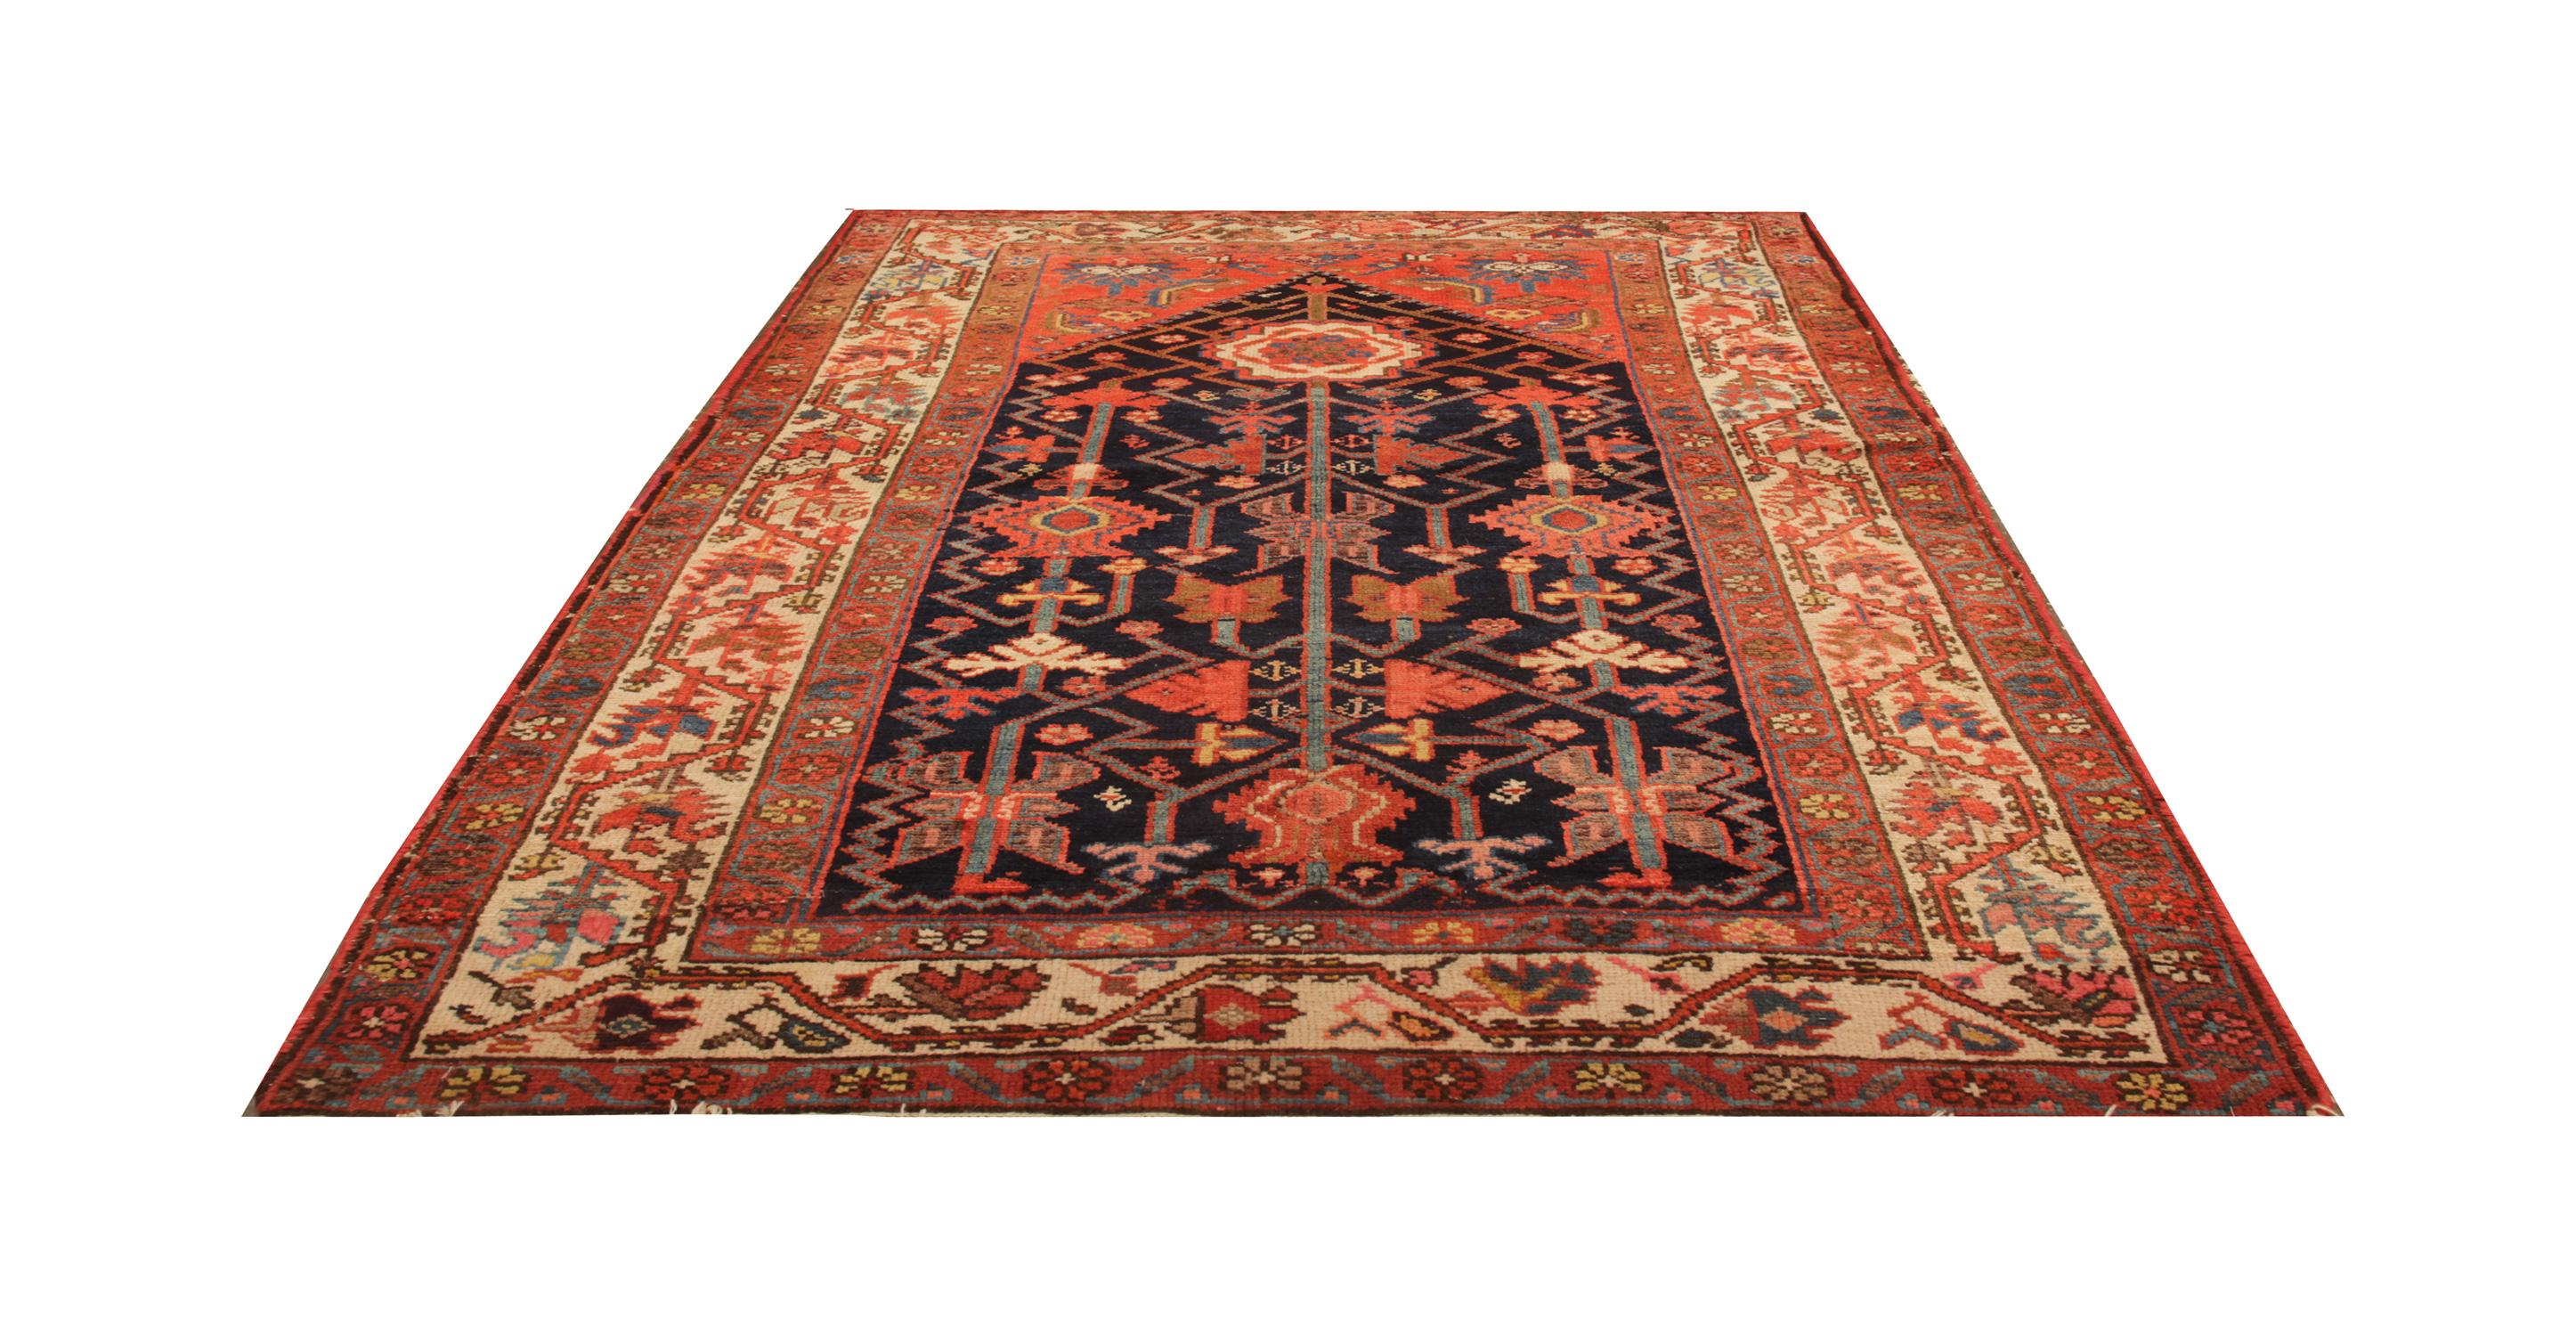 An excellent example of traditional Caucasian carpet rug weaving from the Kazak region. These Medallion ground design patterned rugs can be the best element of home decor objects to give warmth to the environment, because this woven rug has a great